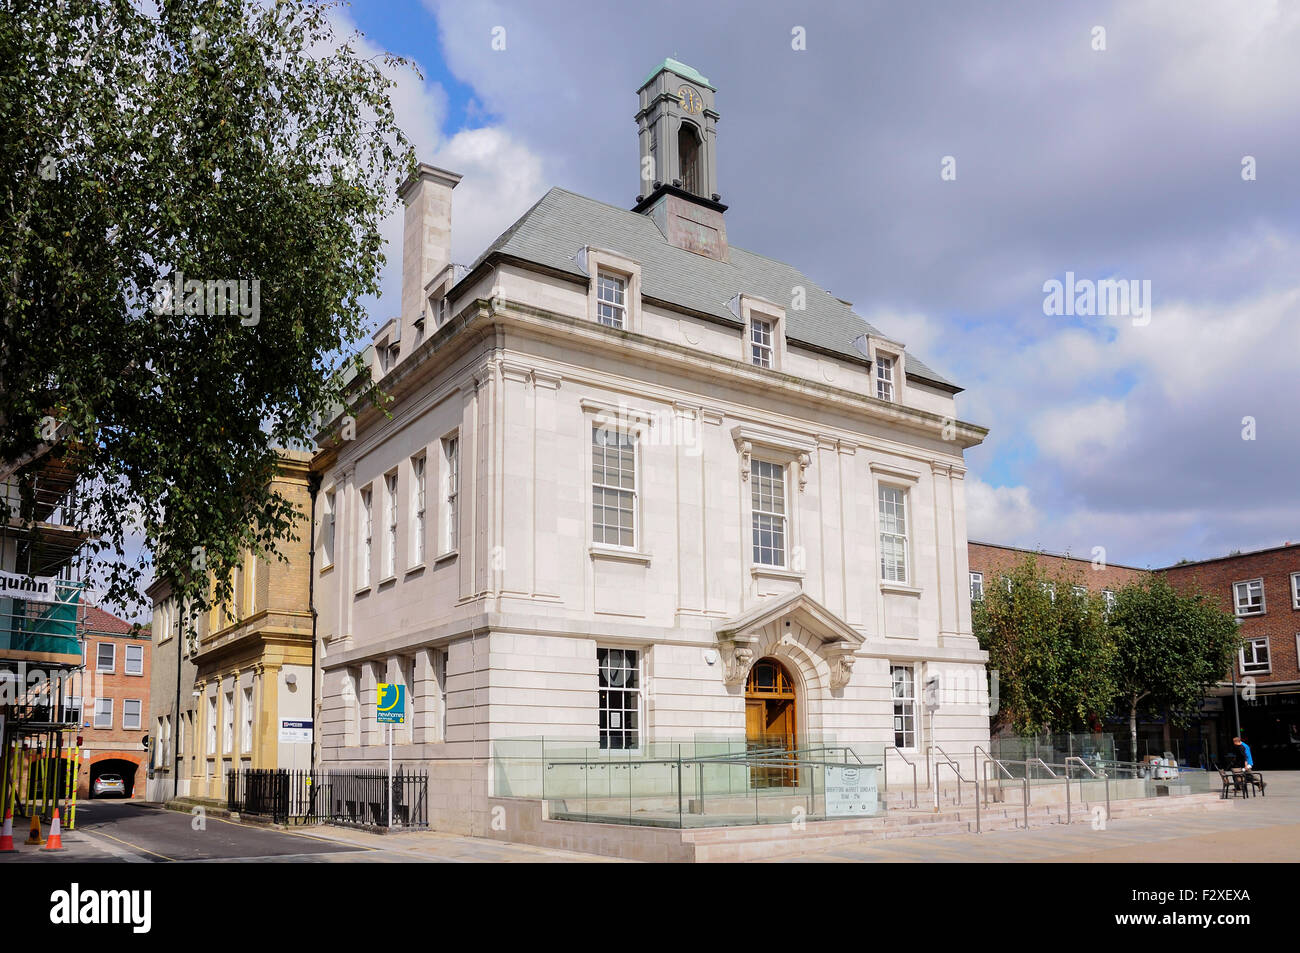 Old Town Hall, Market Place, High Street, Brentford, London Borough of Hounslow, Greater London, England, United Kingdom Stock Photo